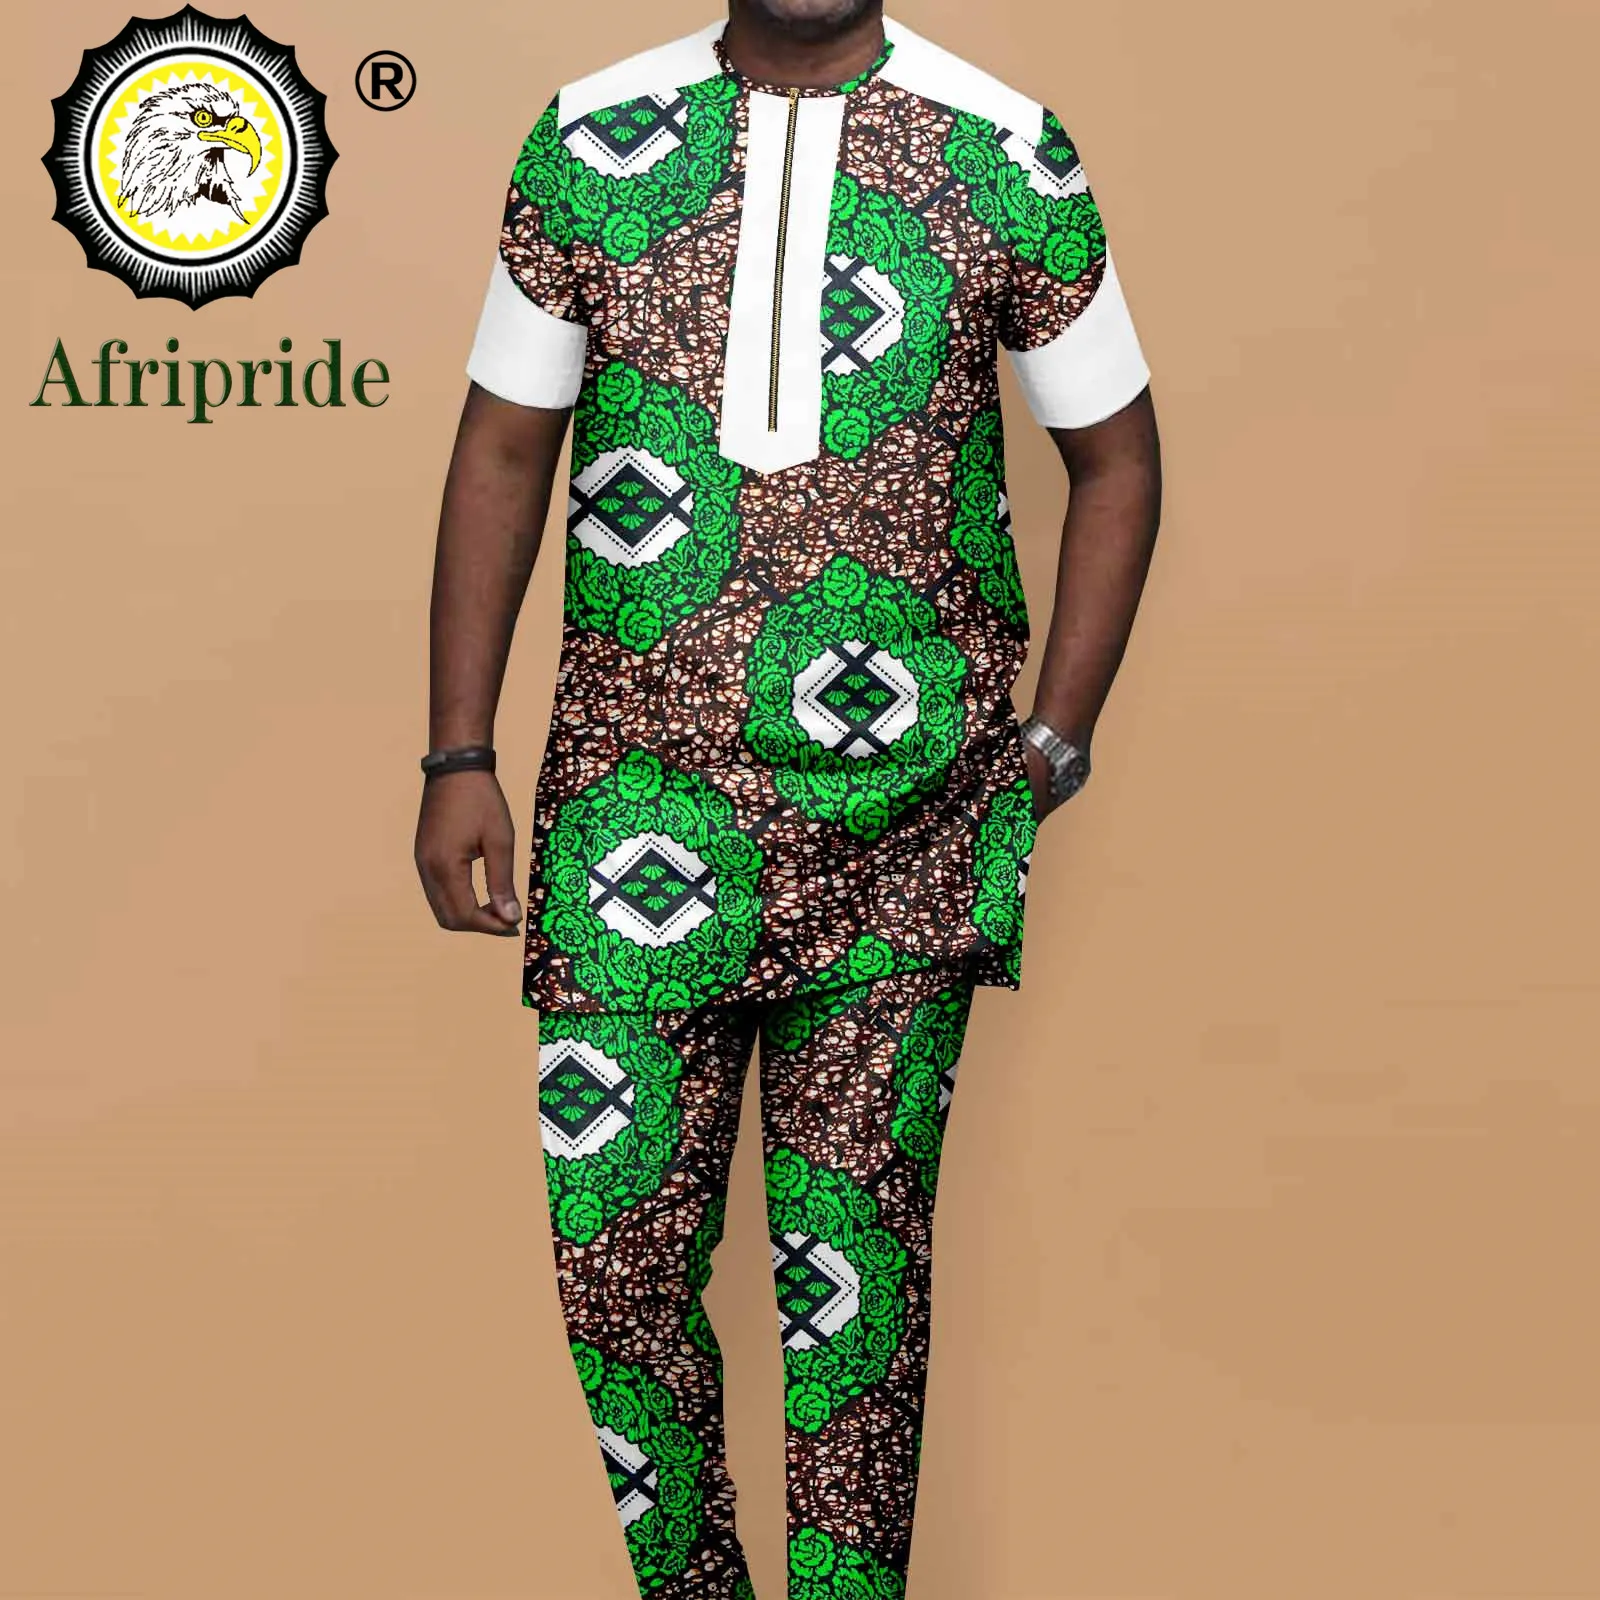 2023 dashiki men tracksuit 2 piece african shirts and ankara pants suits plus size outwear clothes wear afripride a1916057 African Tracksuit for Men Dashiki Print Shirts and Ankara Pants Tracksuit Tribal Outwear Plus Size Casual Clothes A2216031